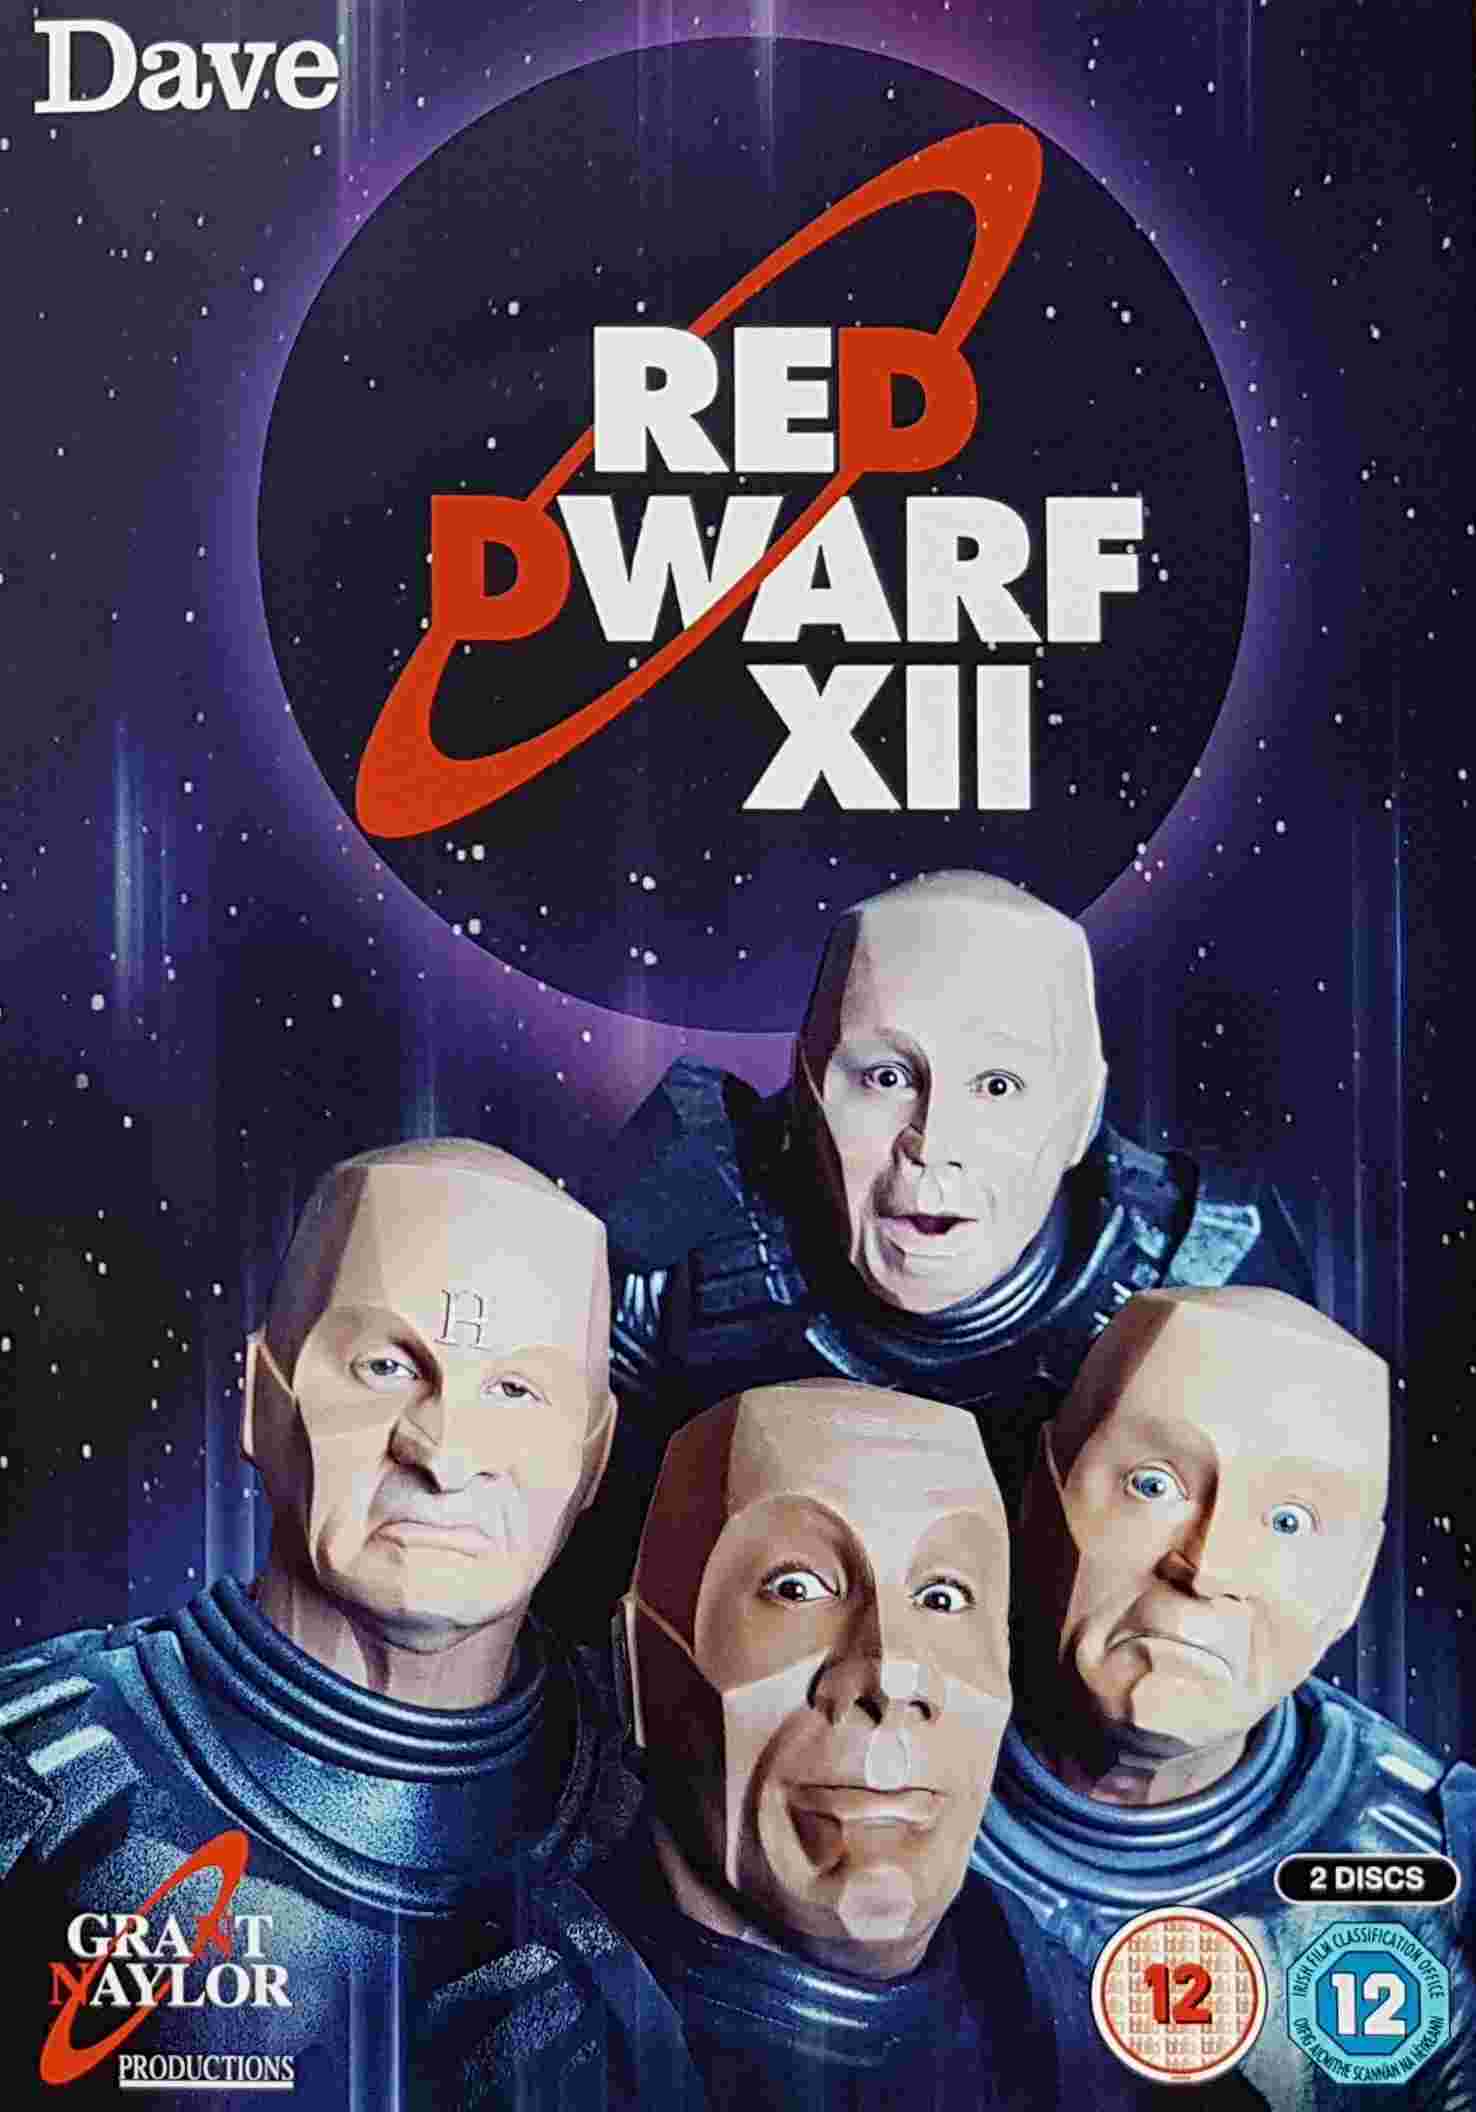 Picture of Red dwarf - Series XII by artist Doug Naylor from the BBC dvds - Records and Tapes library